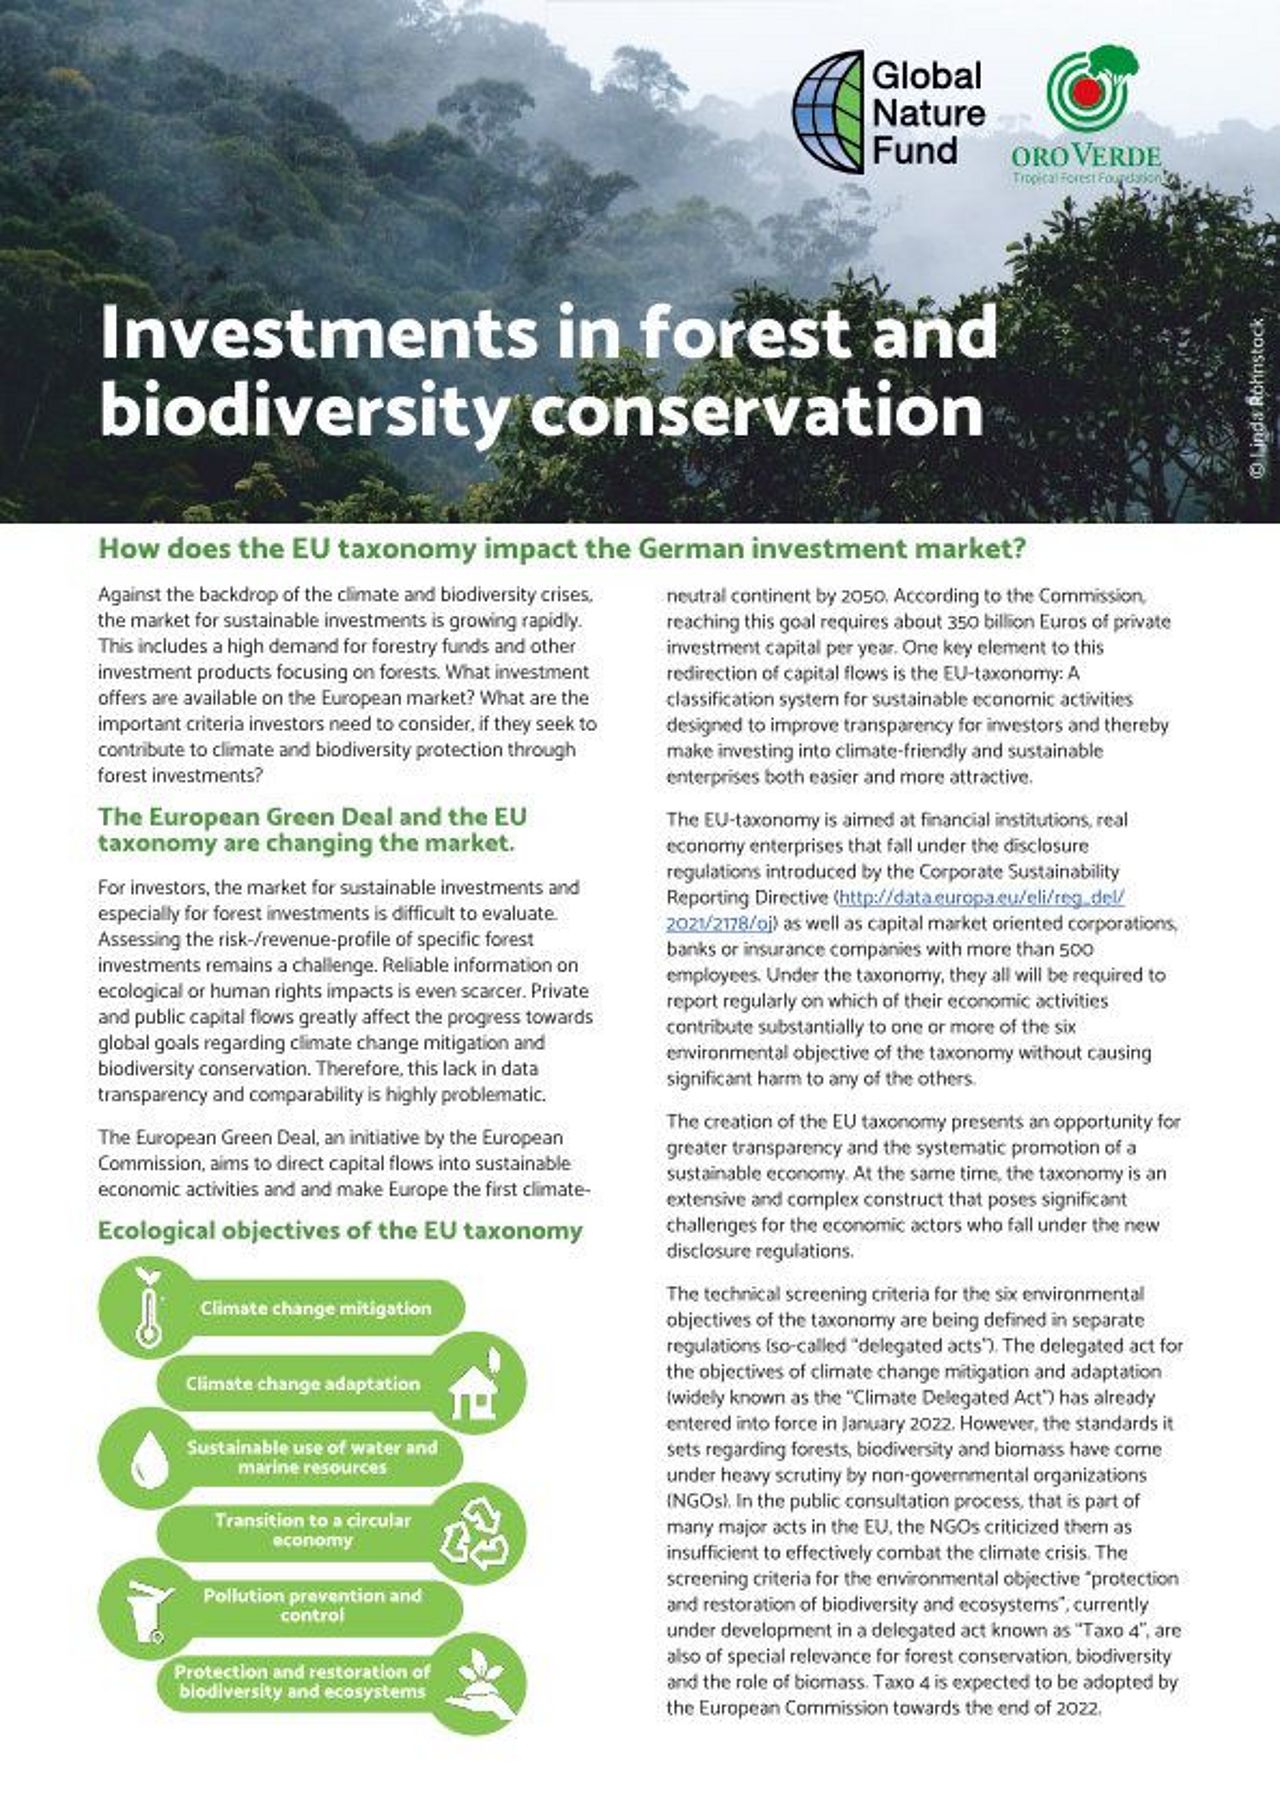 Factsheet: Investments in forest and biodiversity conservation